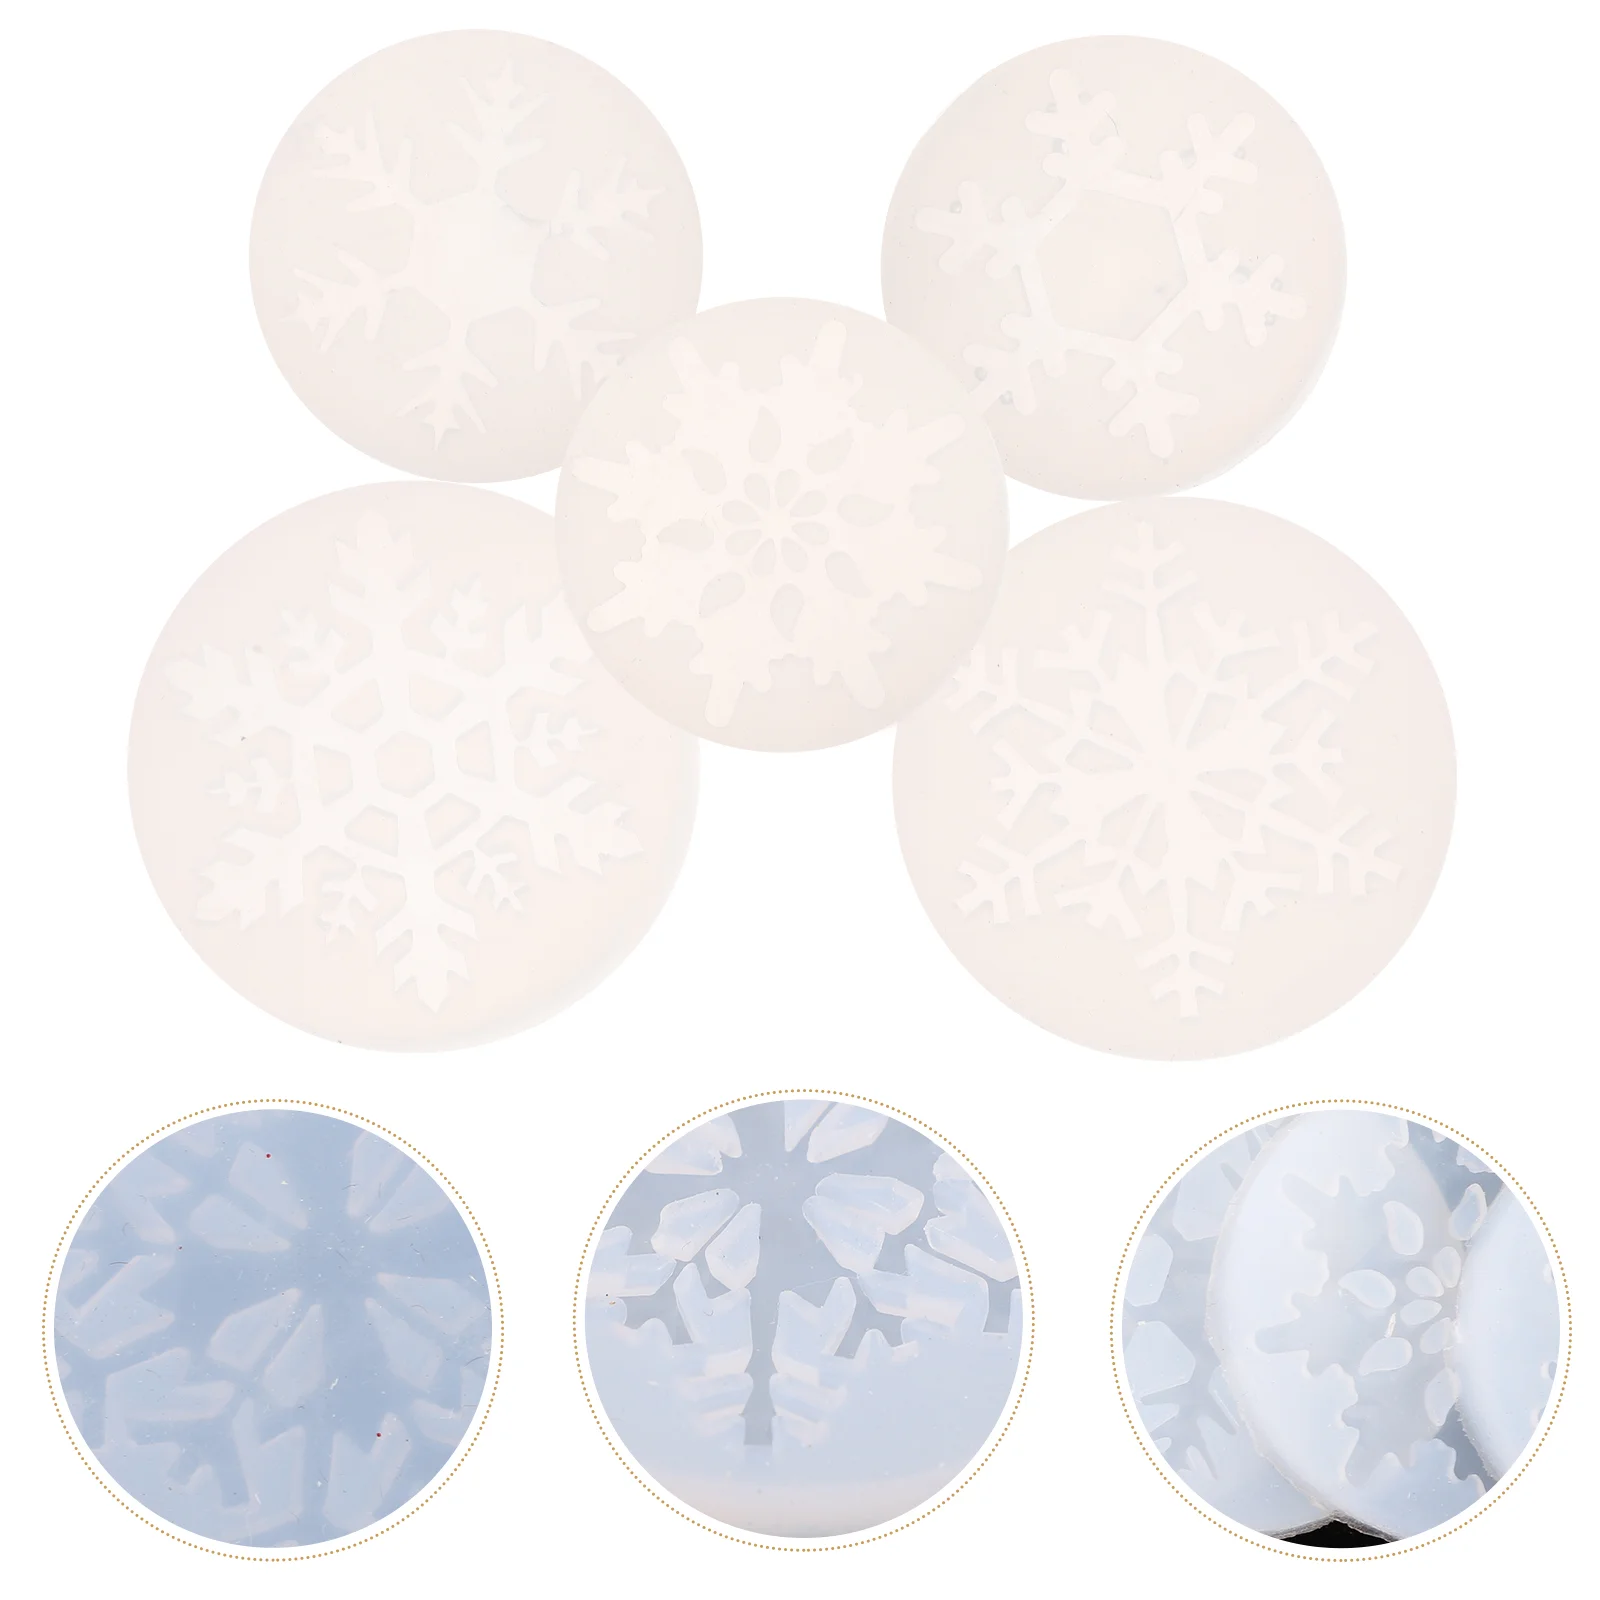 

Ciieeo Silicone Molds Snowflake Resin Casting Shape Making Coaster Mobile Phone Decor Tool